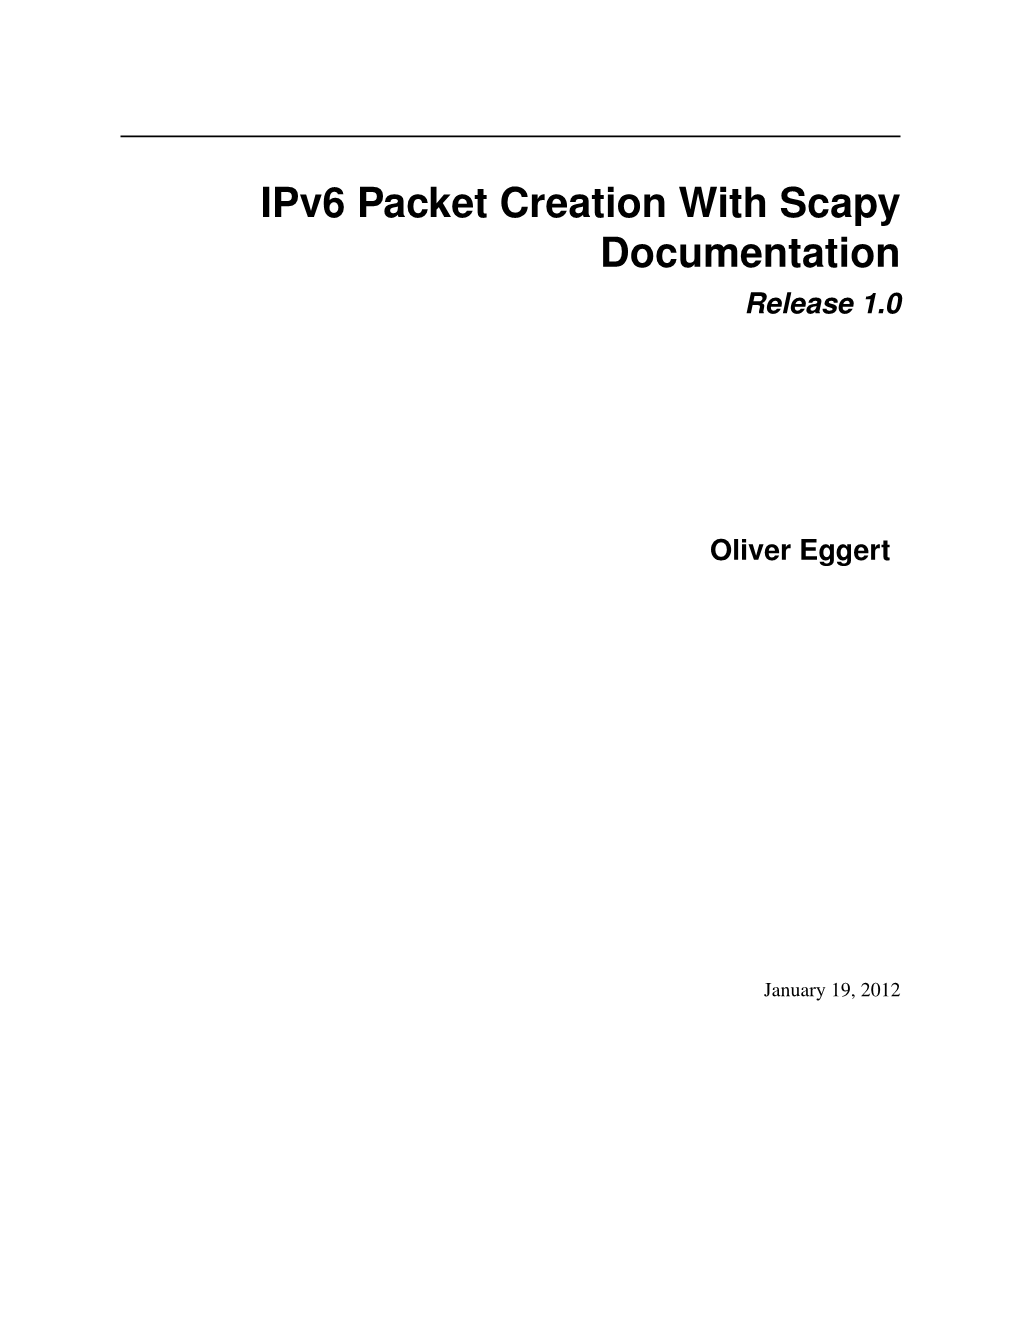 Ipv6 Packet Creation with Scapy Documentation Release 1.0